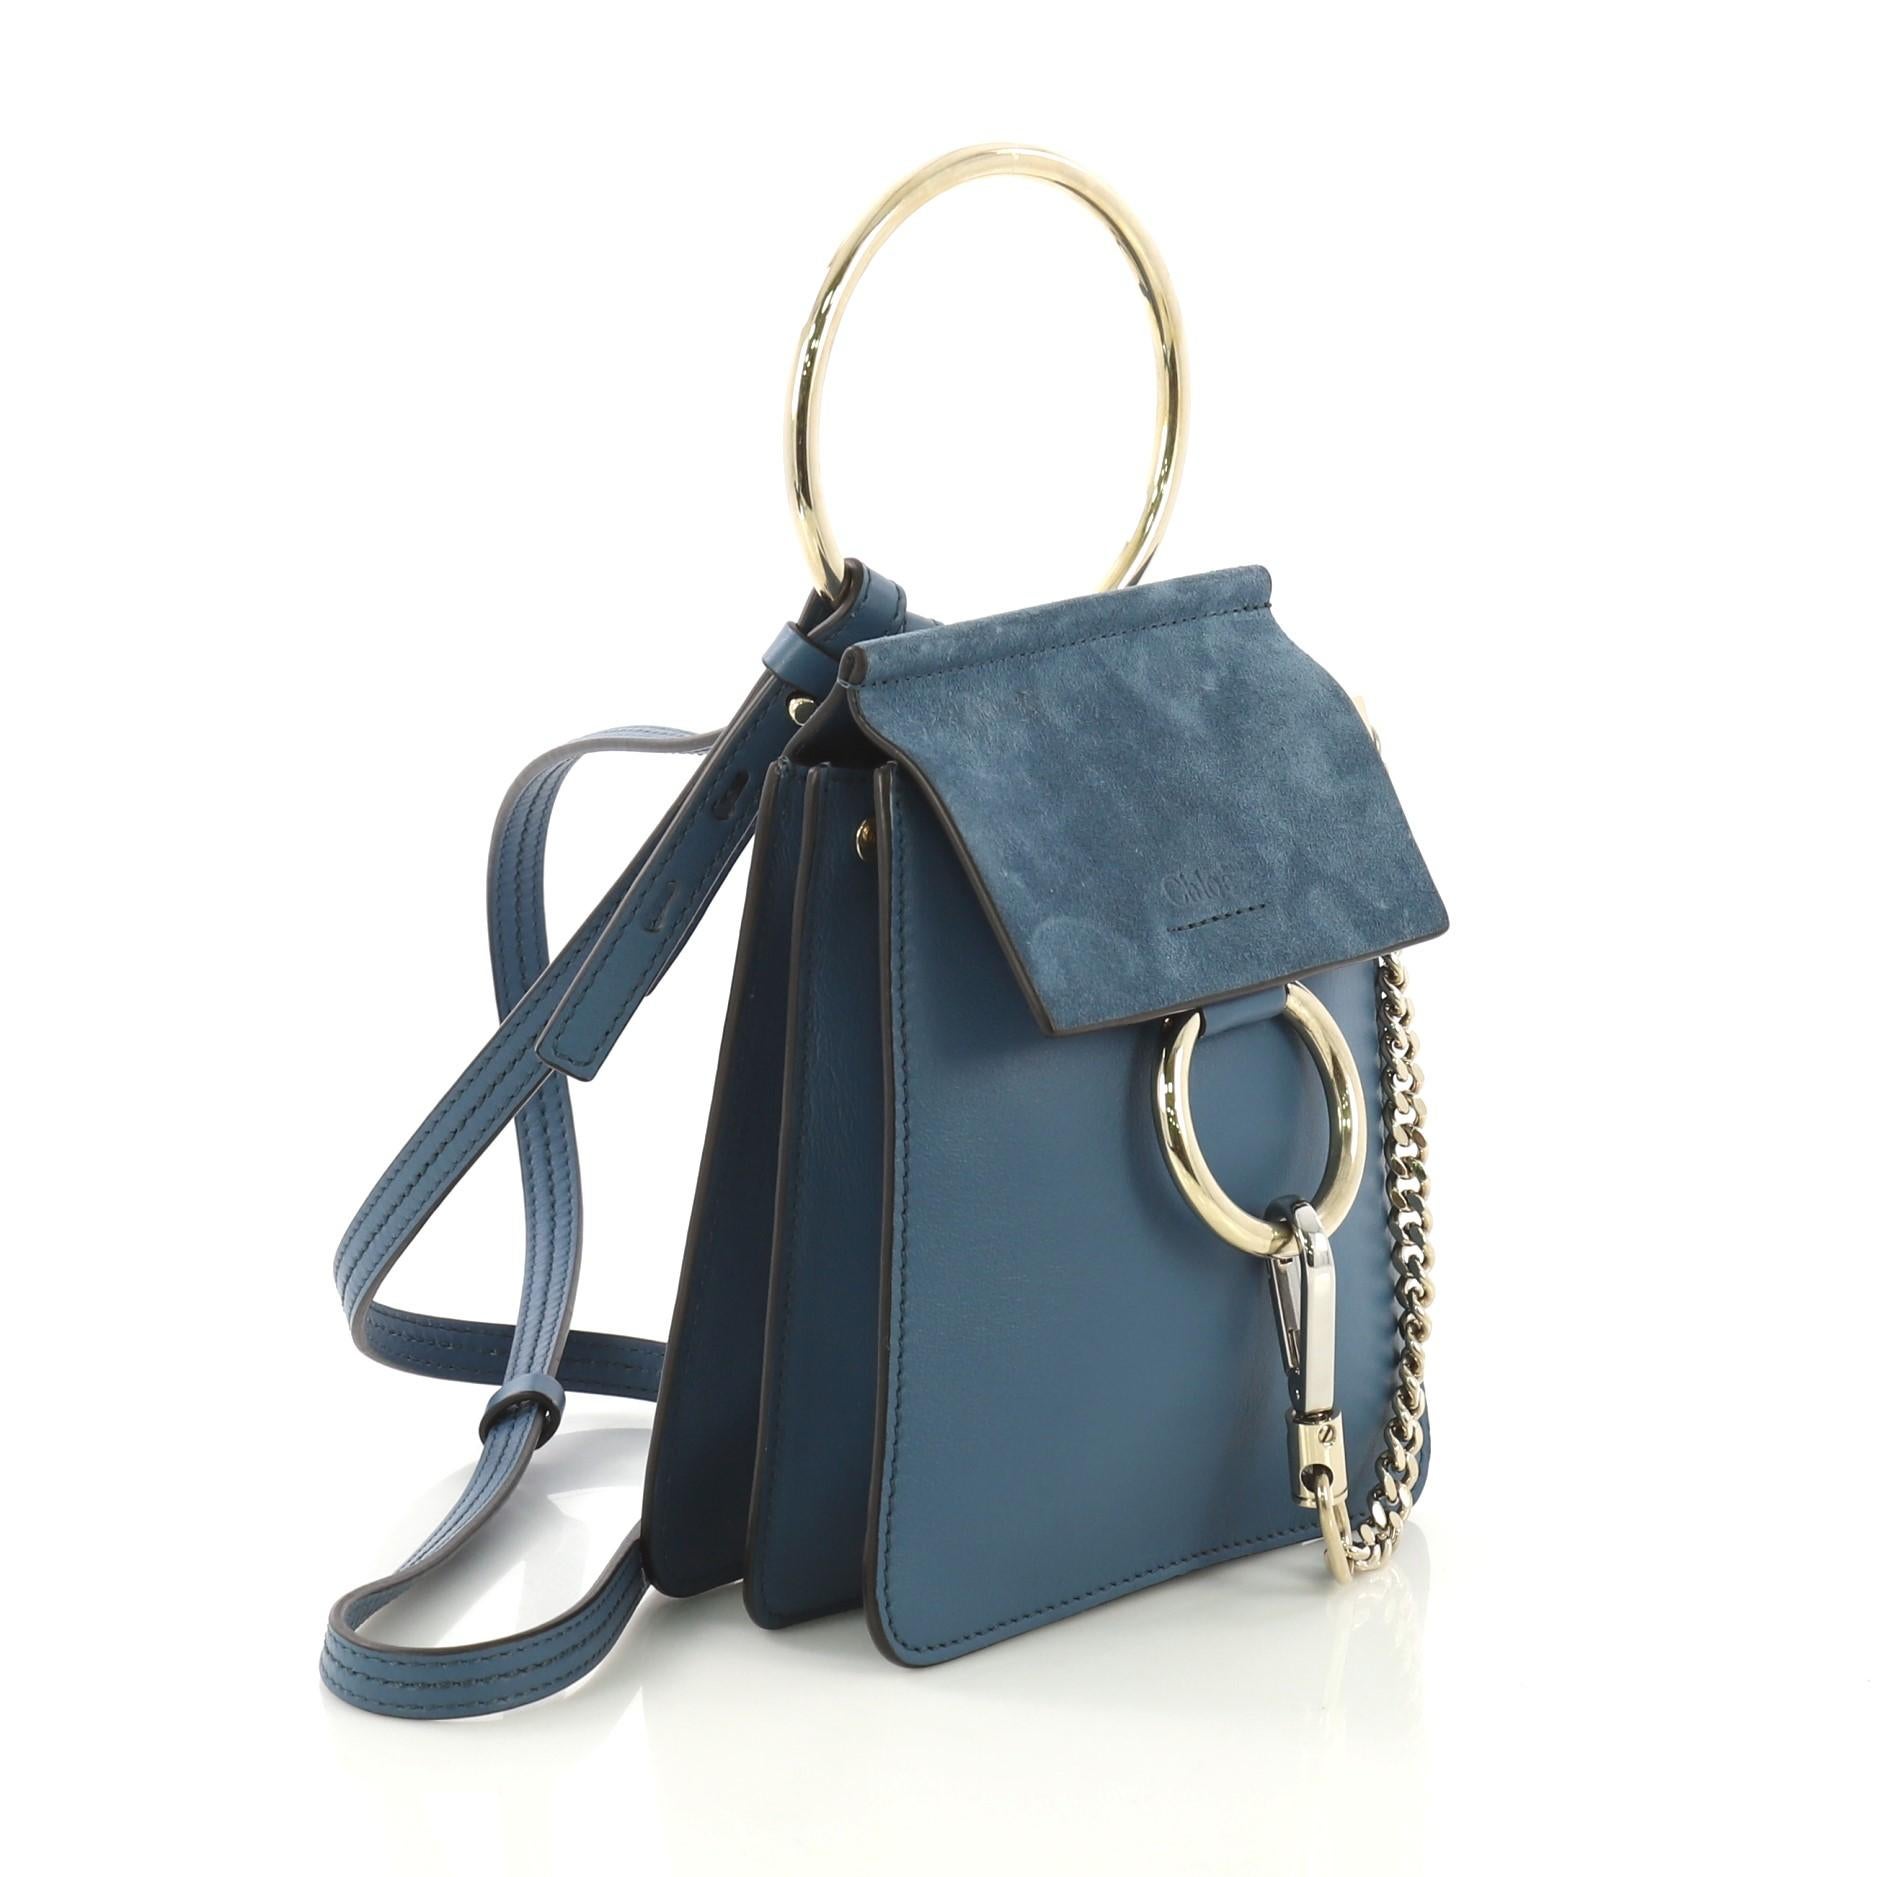 This Chloe Faye Bracelet Crossbody Bag Leather and Suede Mini, crafted from blue leather, features an adjustable crossbody strap, ring detail and chain, side snap buttons, and gold and silver-tone hardware. Its magnetic snap closure opens to a beige